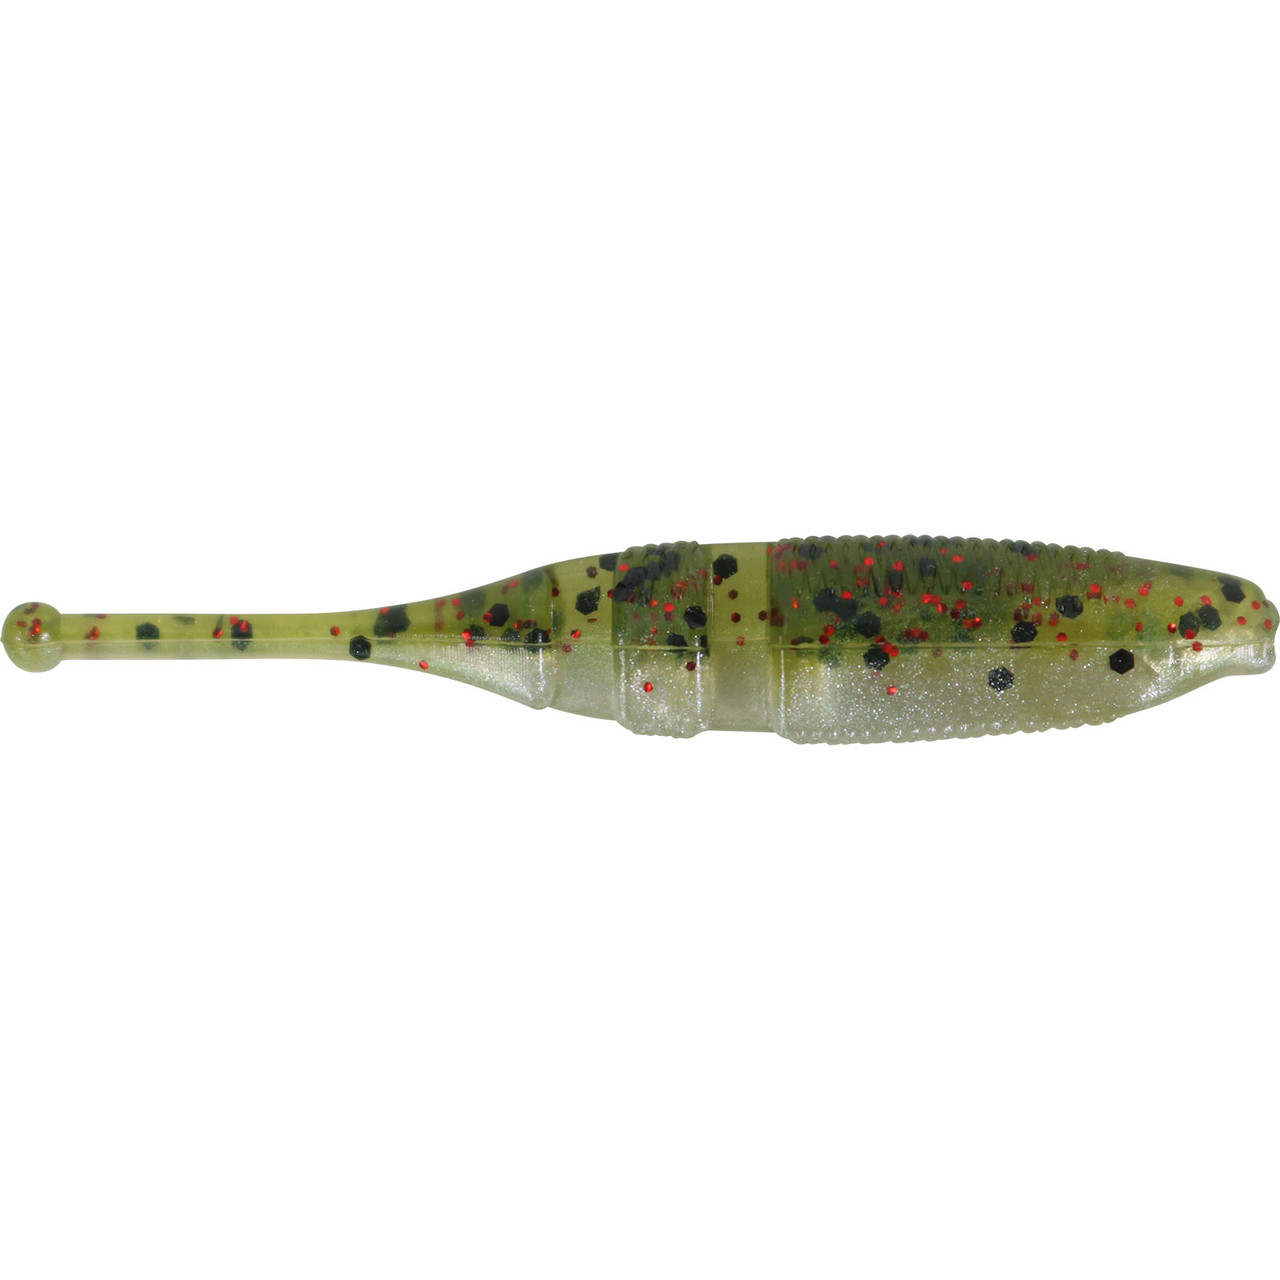 Lake Fork Live Baby Shad 2.25 inch - 15ct Watermelon red/pearl